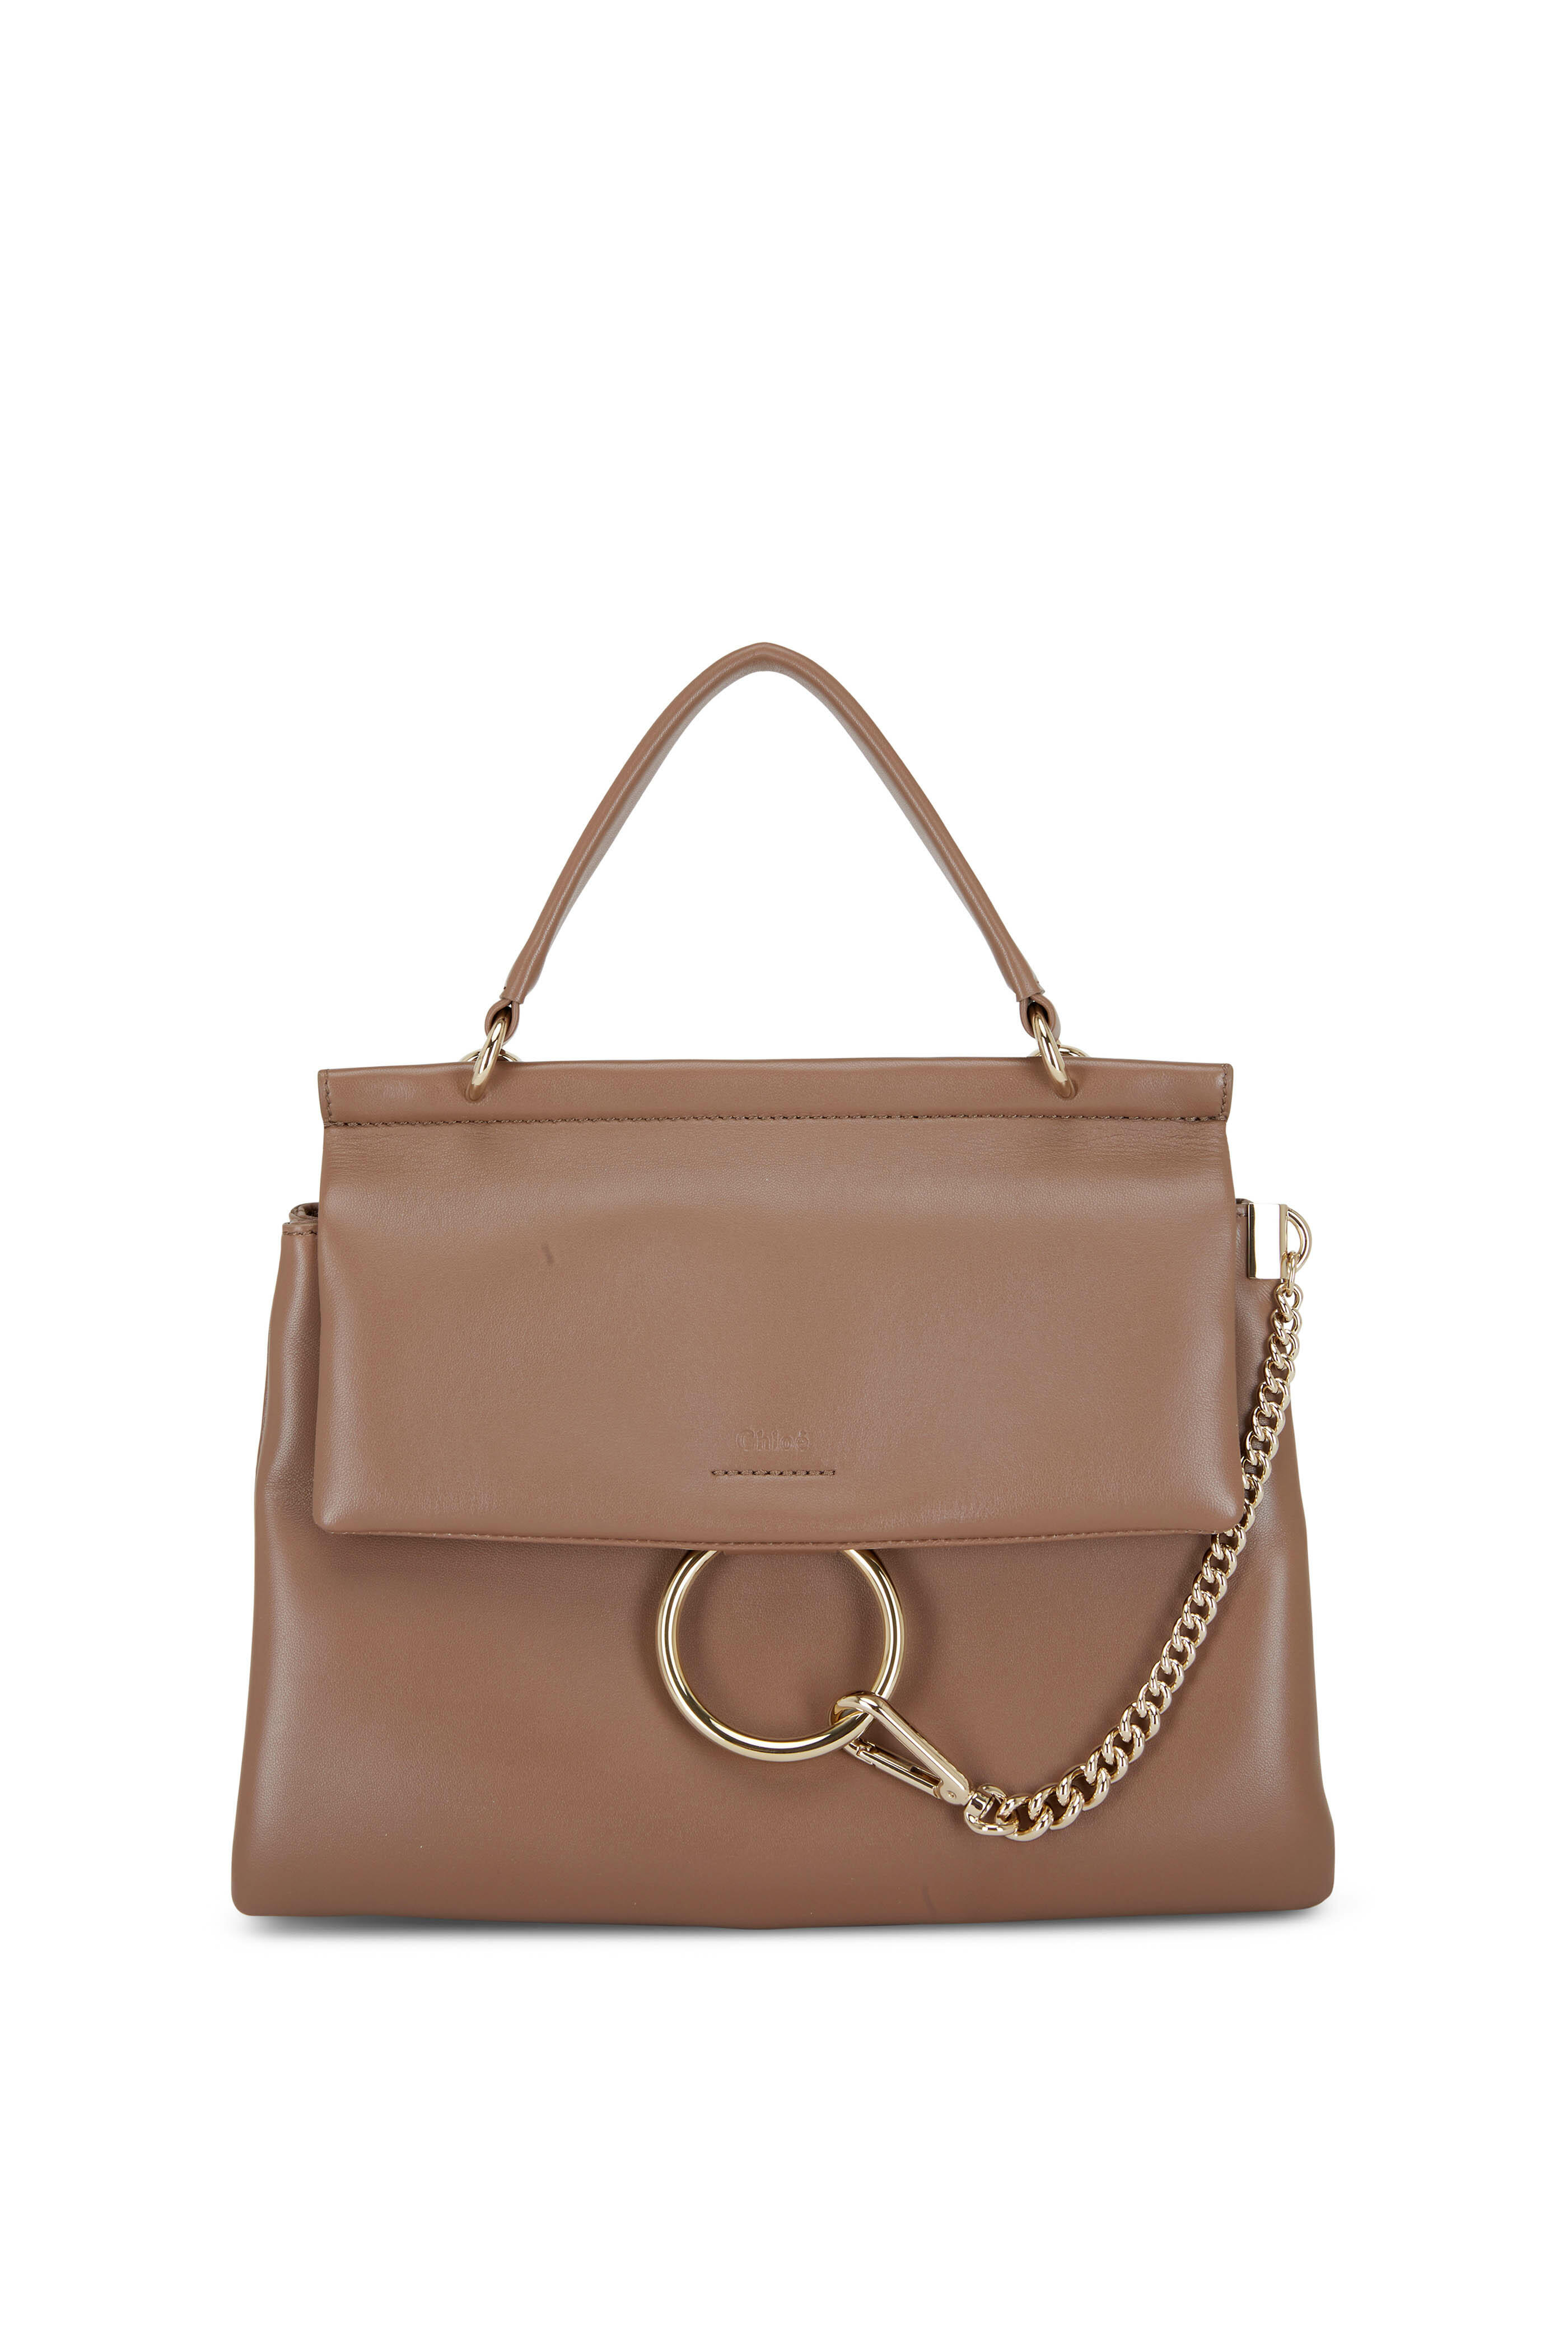 Chloe Taupe Leather and Suede Small Faye Shoulder Bag Chloe